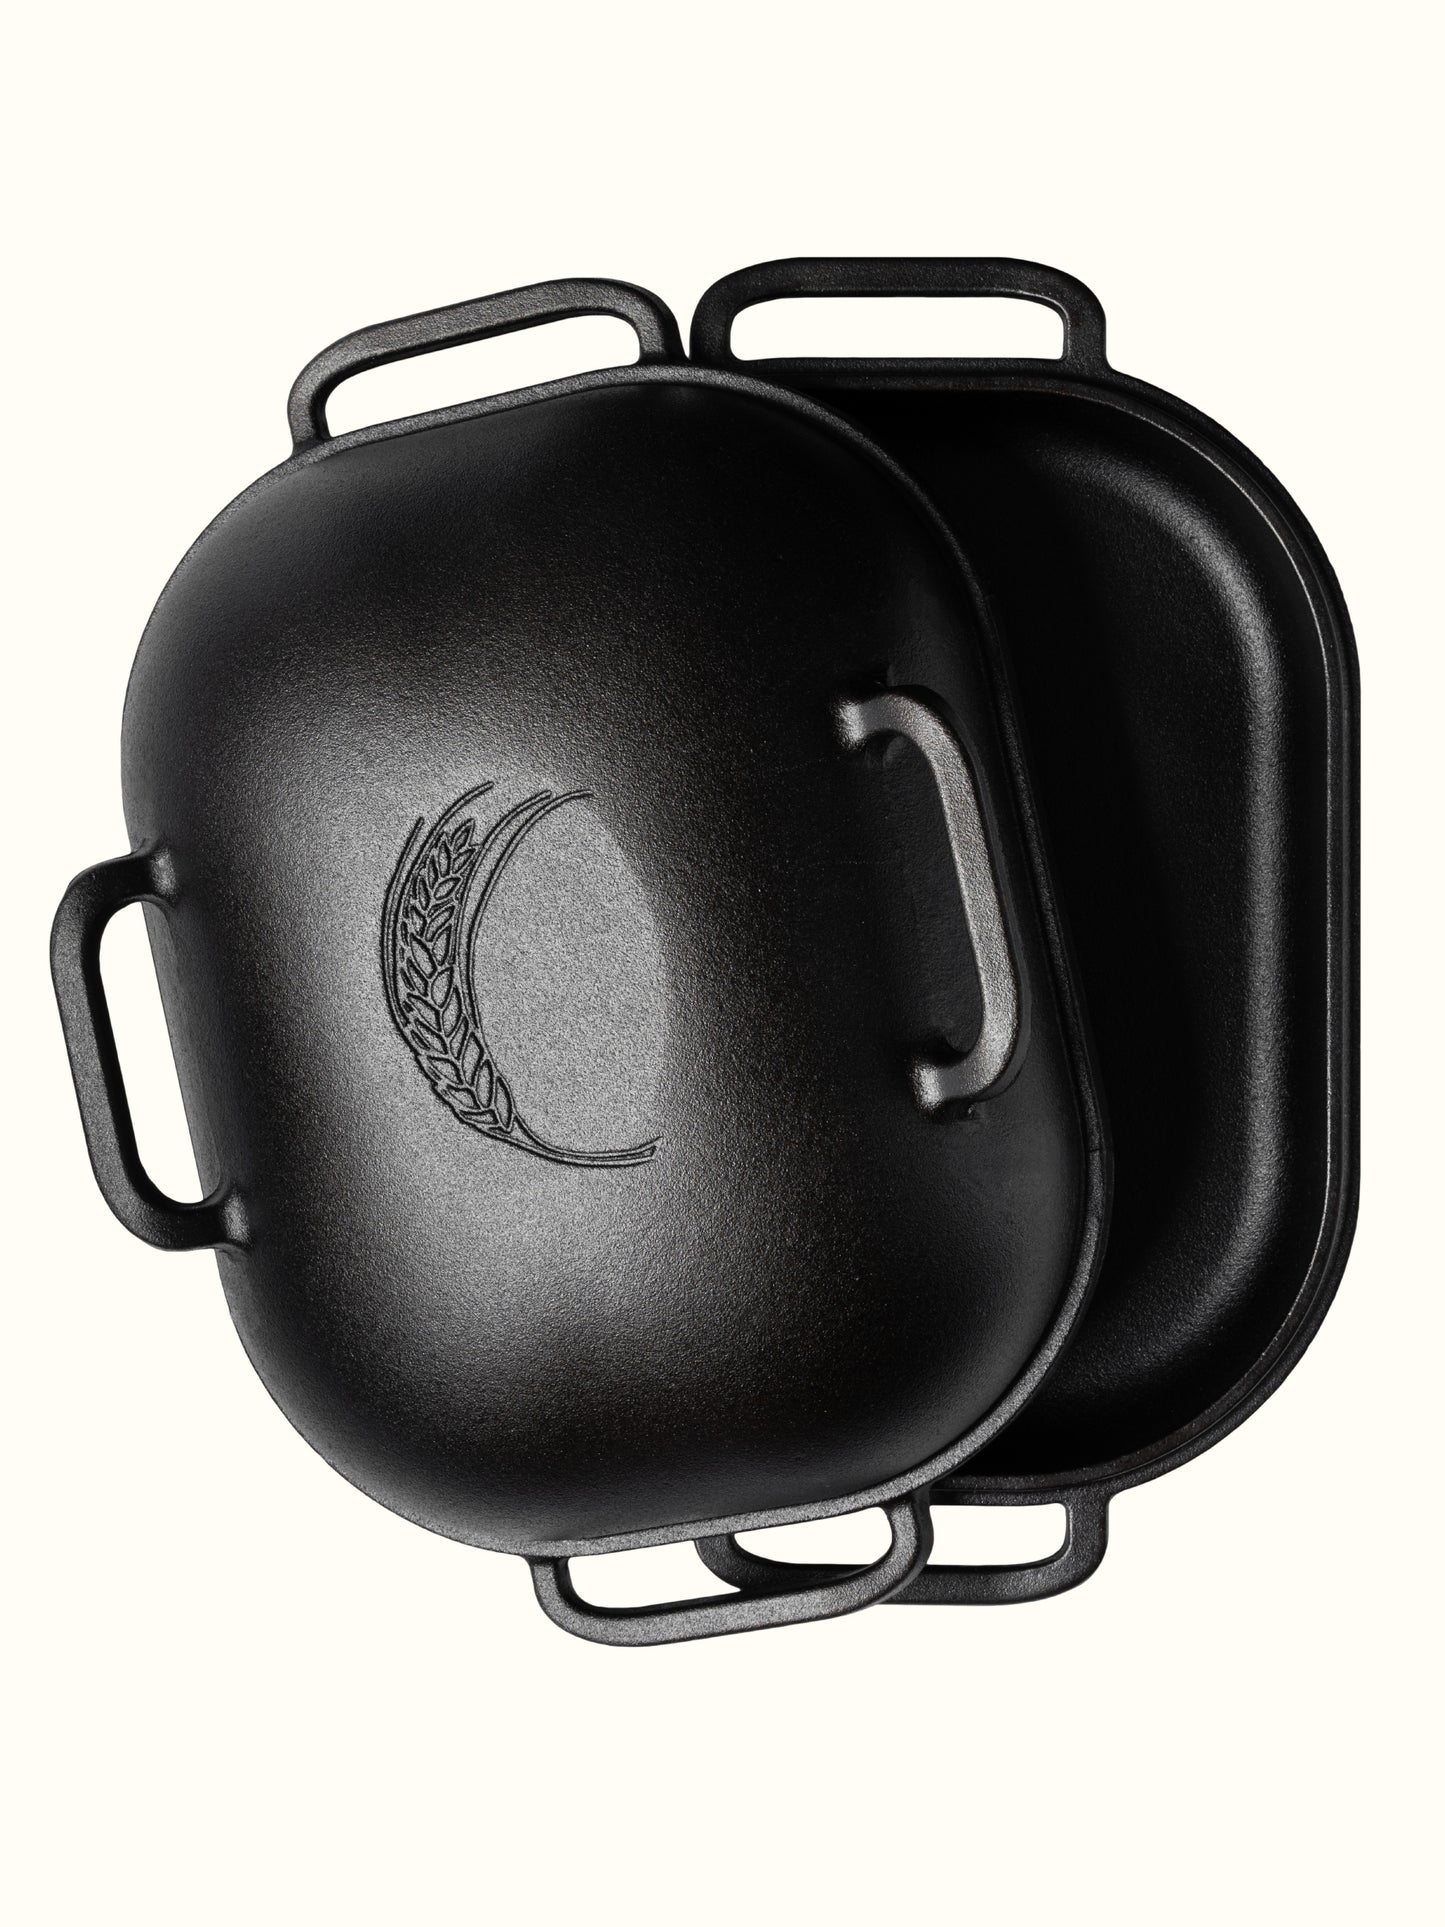 A Challenger Breadpan available from Canada.